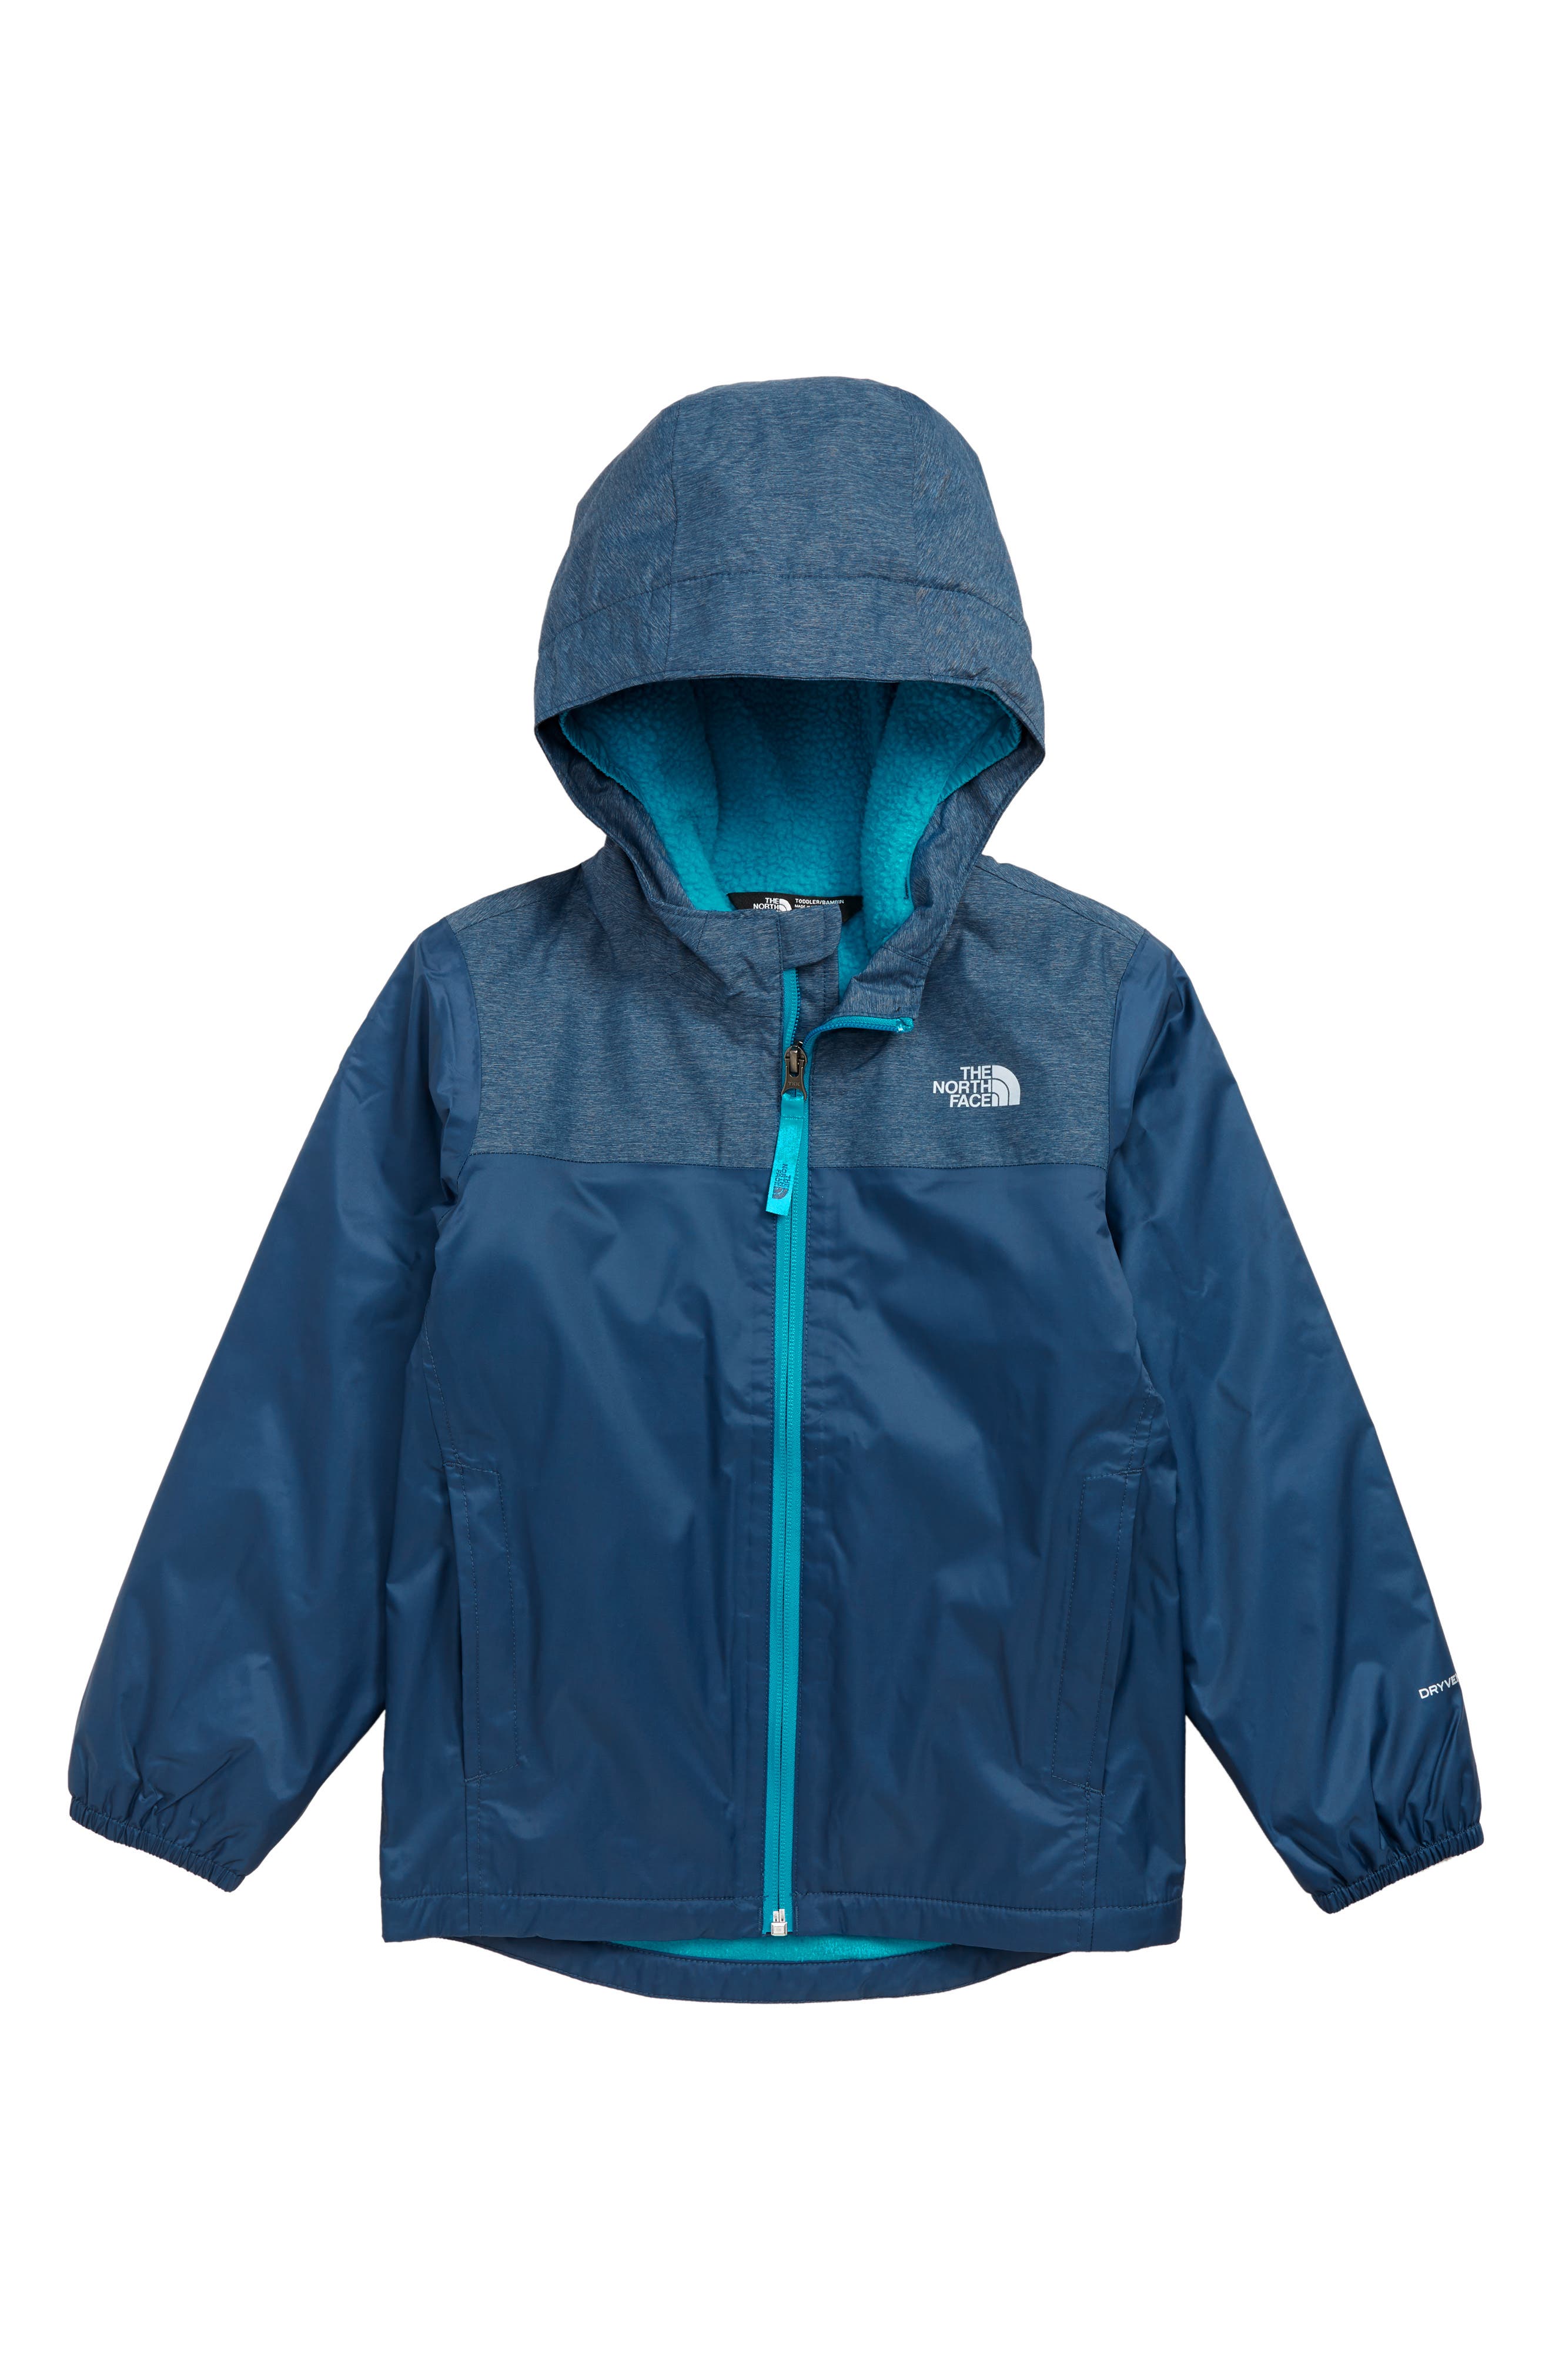 north face youth warm storm jacket